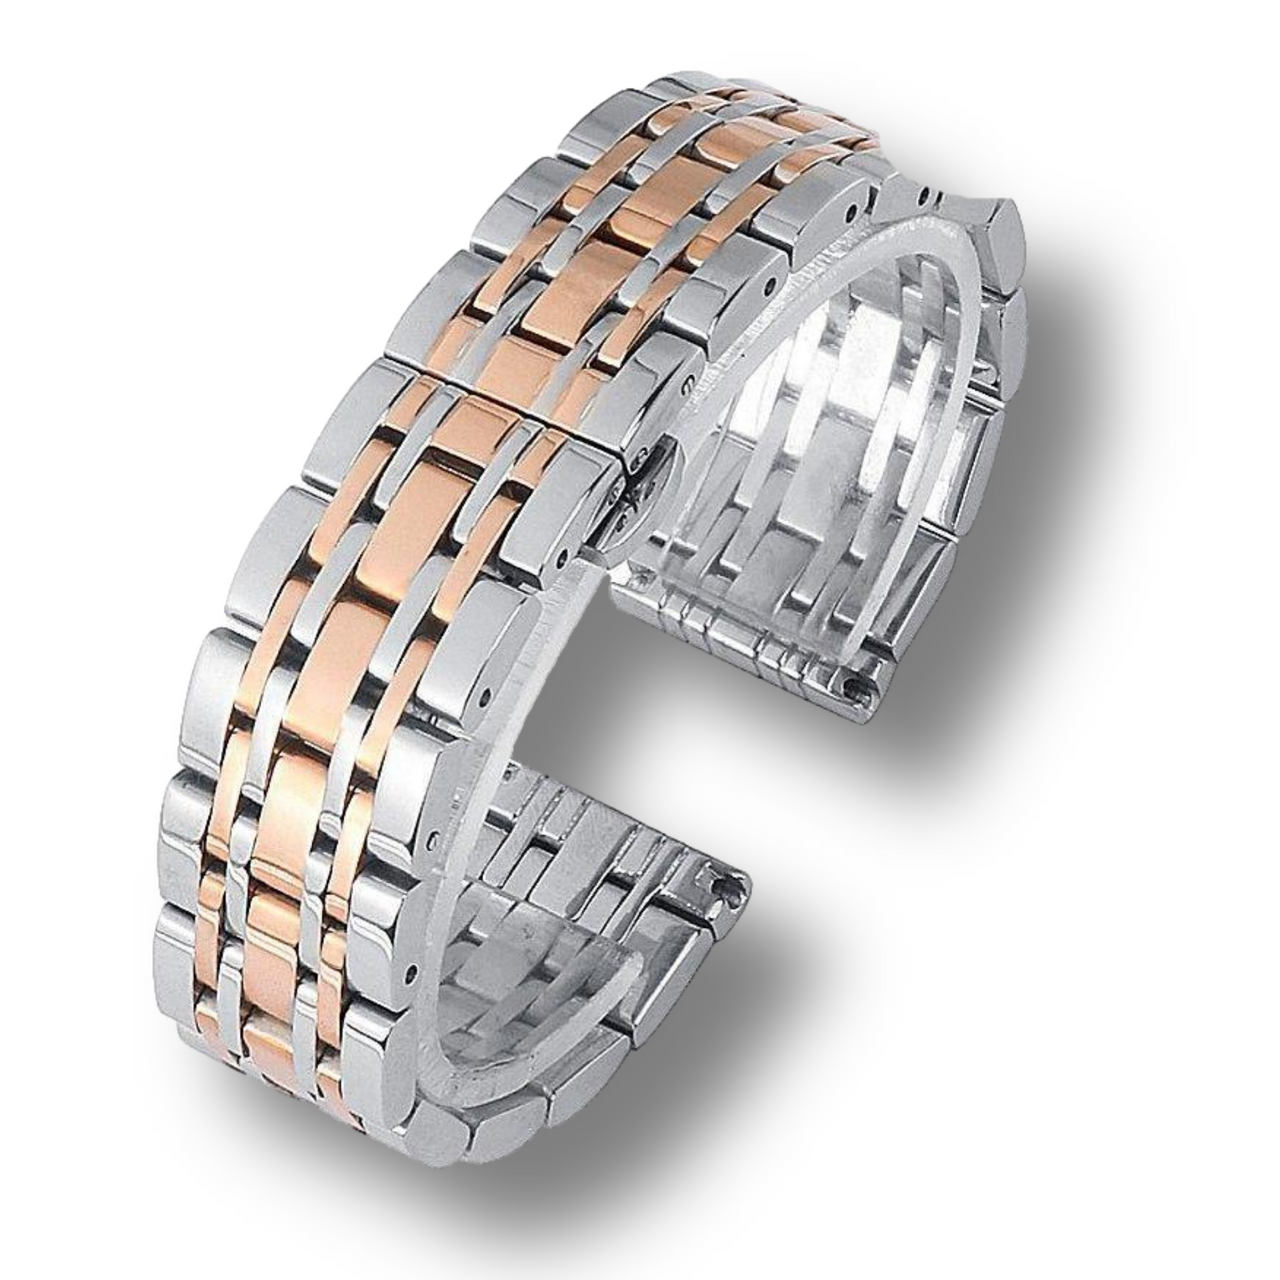 Womens Stainless Steel Bracelet - watchband.direct